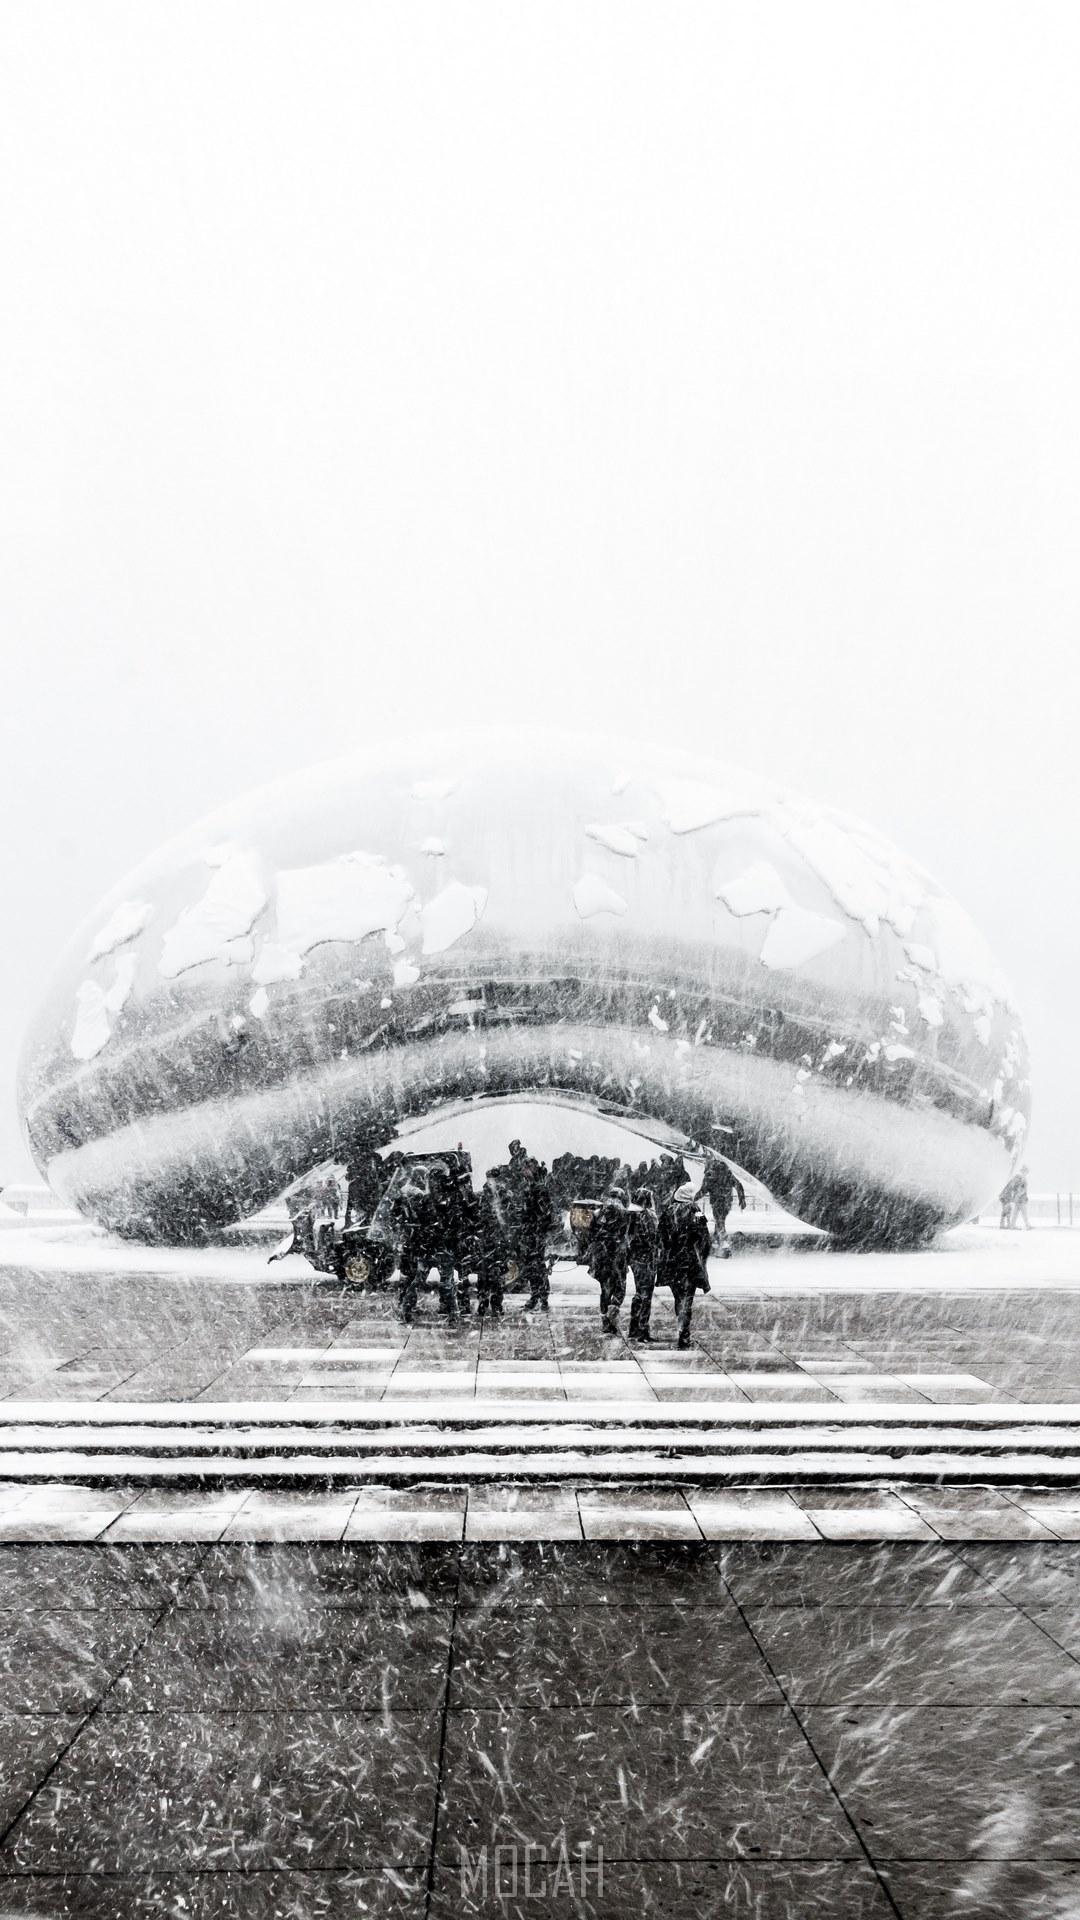 HD wallpaper, 1080X1920, Apple Iphone 6S Plus Background, The Bean Snowy In March, Black And White Shot Of Group Of People Standing Near Modern Sculpture In Heavy Snow Chicago